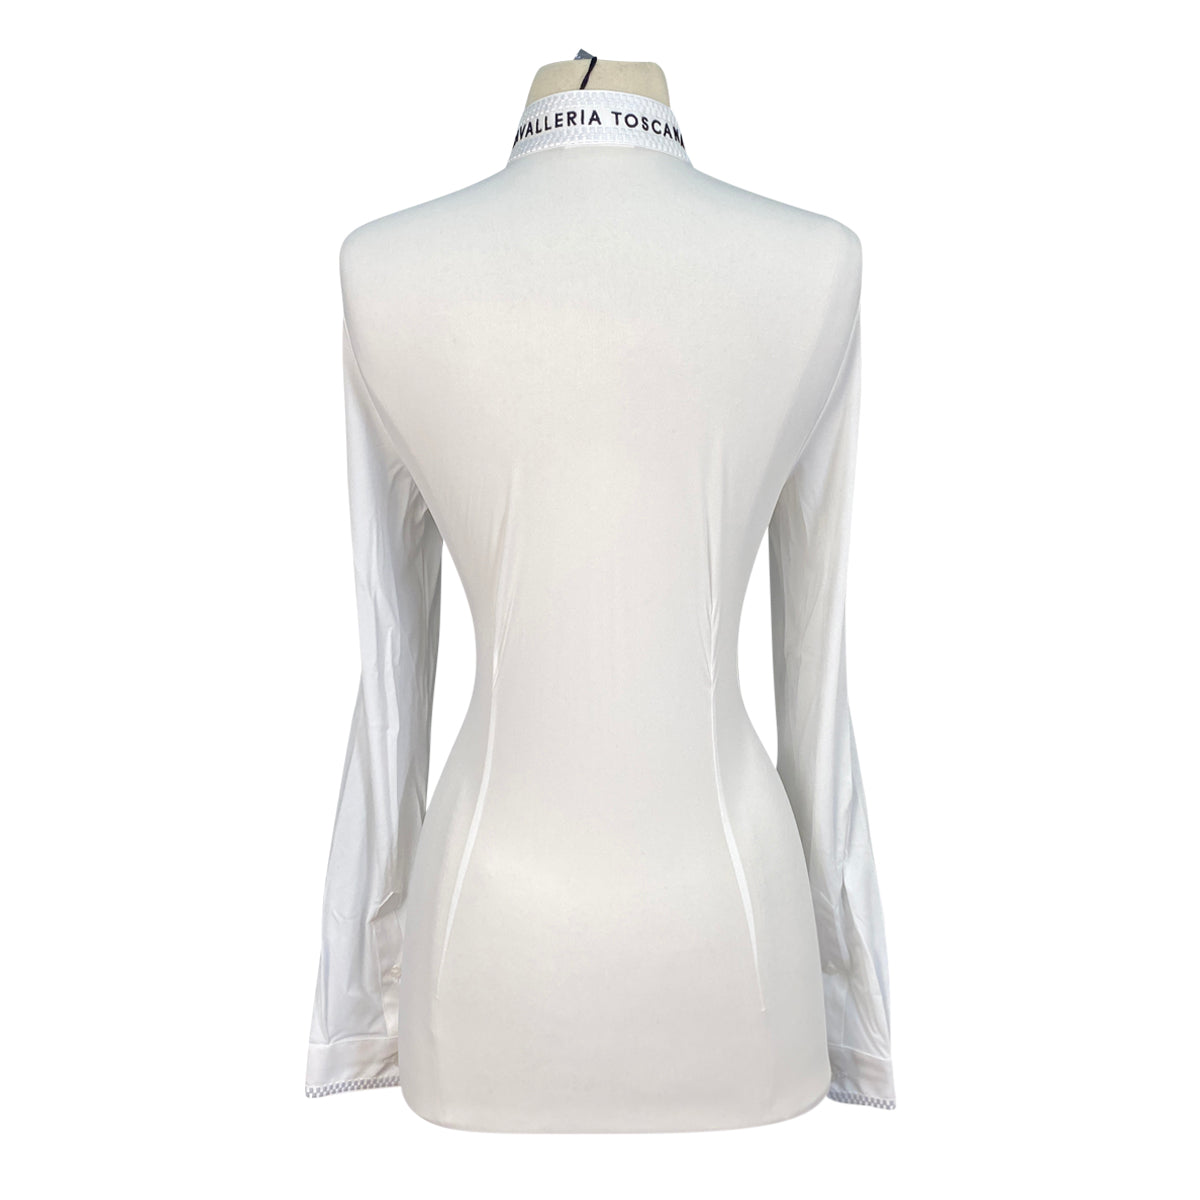 Cavalleria Toscana L/S Jersey Competition Shirt in White